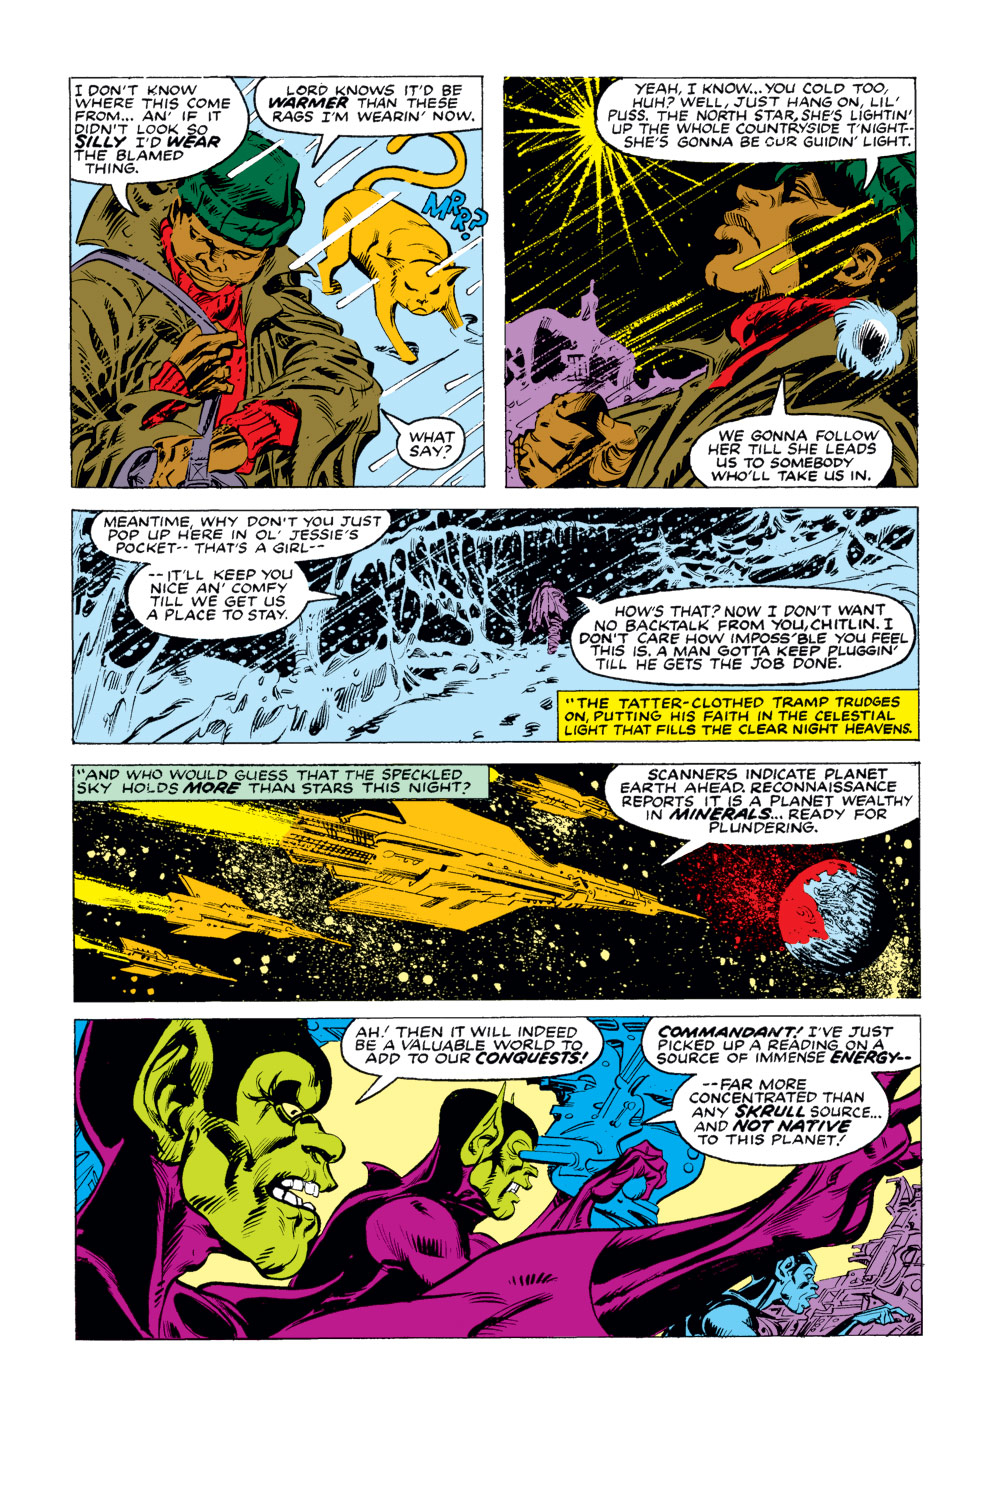 What If? (1977) issue 15 - Nova had been four other people - Page 14